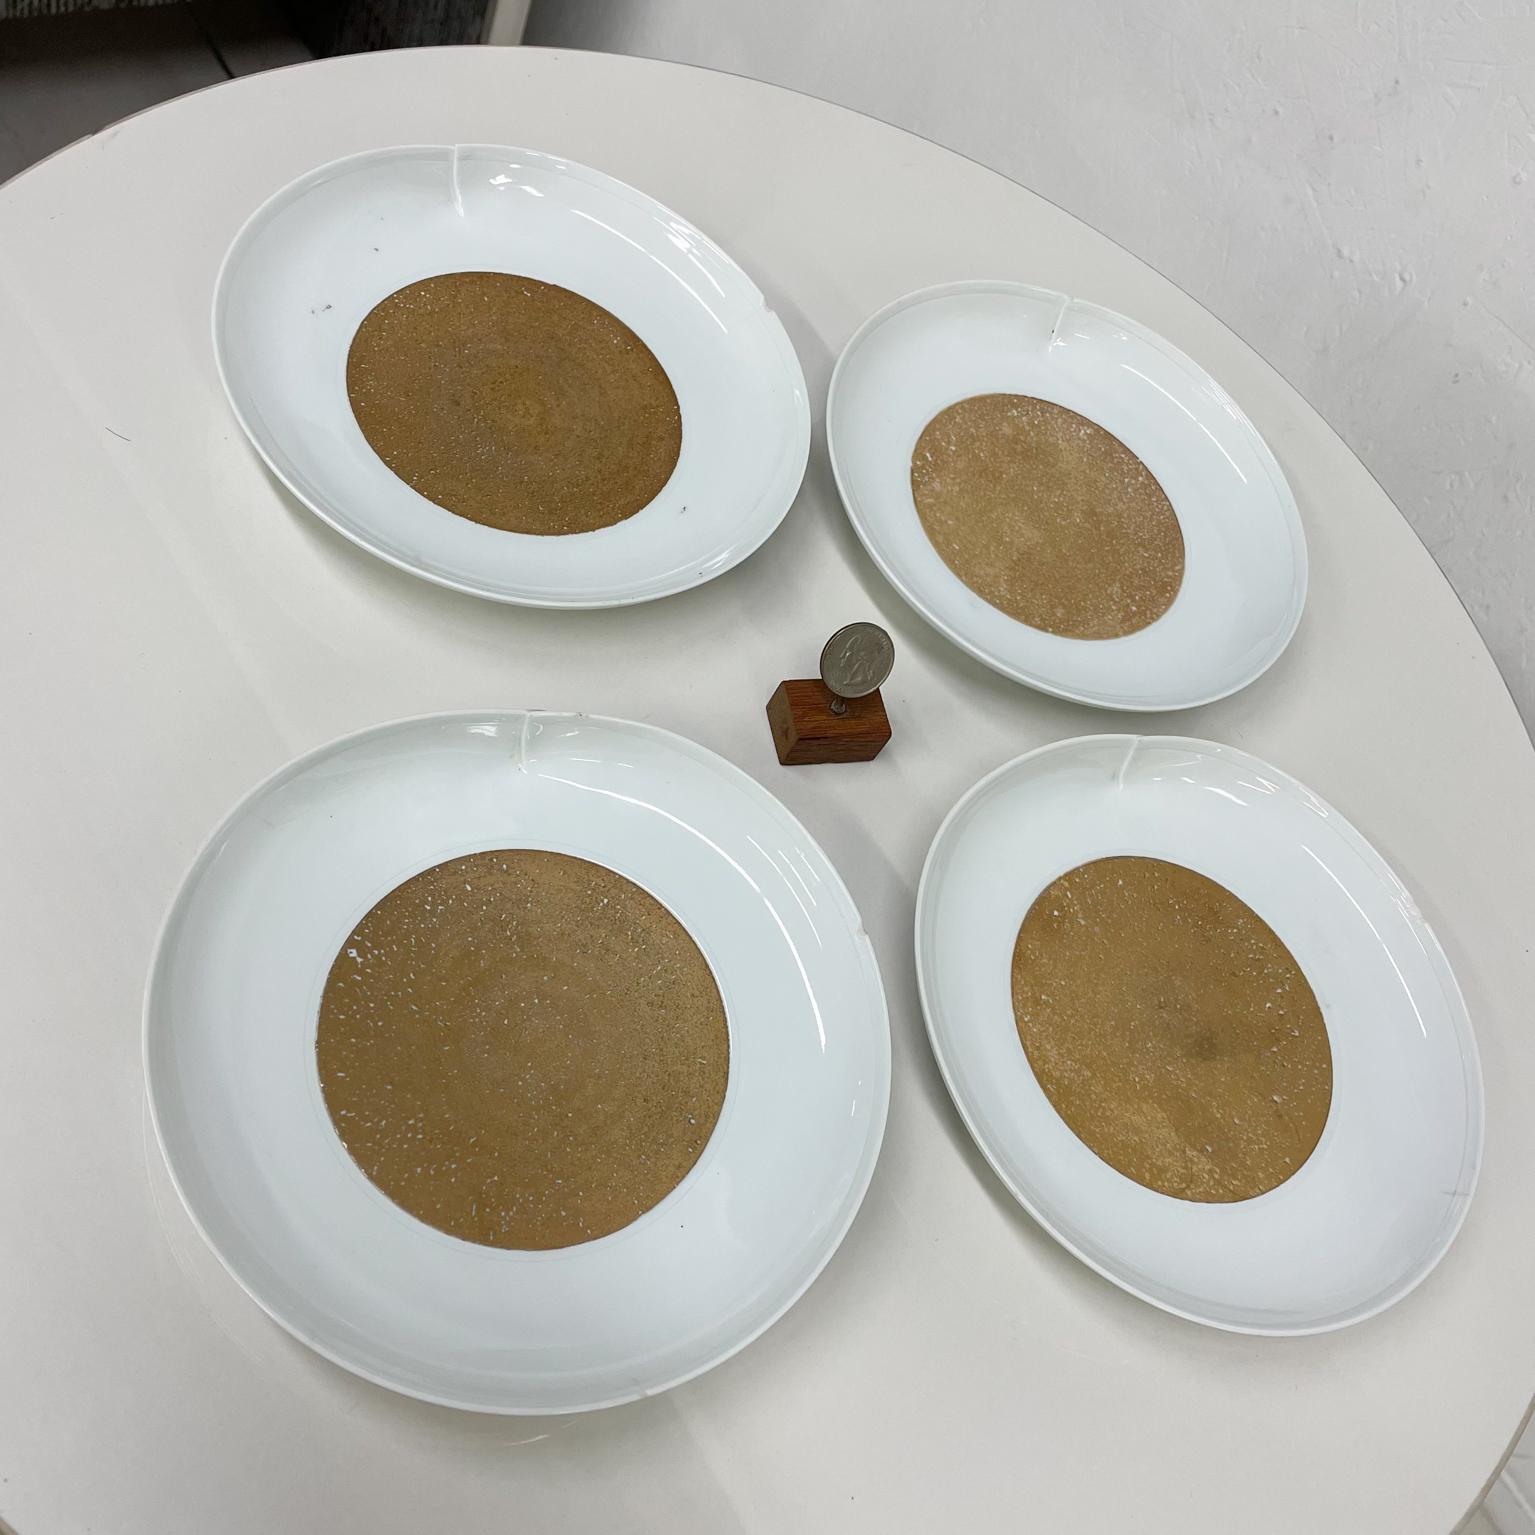 Plate Set
Japanese Midcentury Ceramic Porcelain Plate Set of Four Very Modern White with dazzling Gold Center.
Signed on back.
7.25 x 7 d x 1.25 T inches
Preowned unrestored vintage condition. Three plates have nicks. Expect Vintage wear.
Refer to